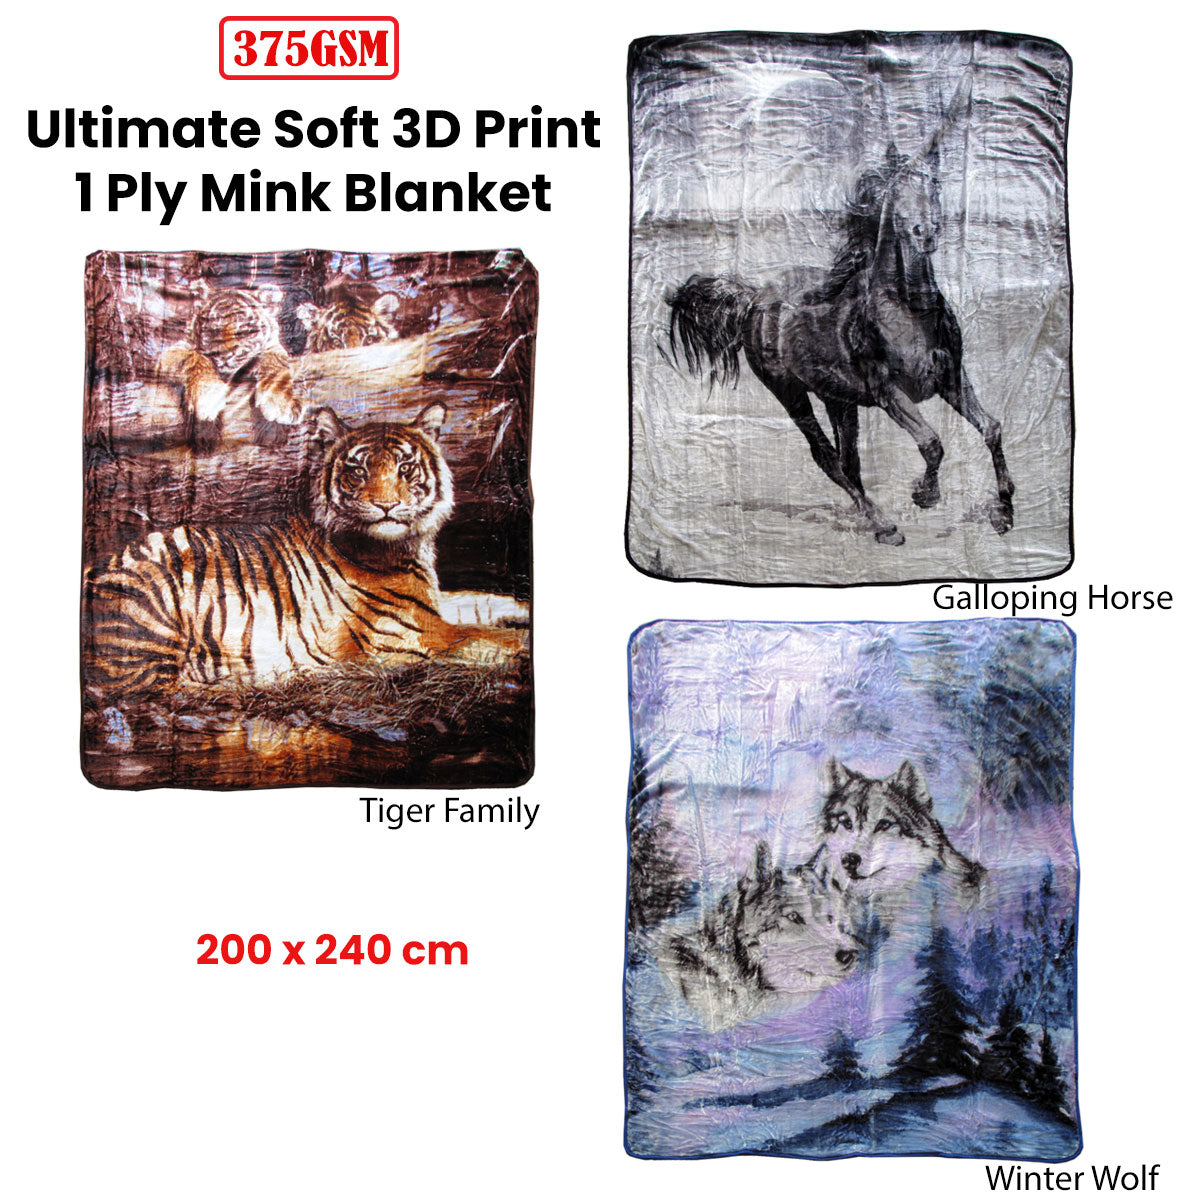 375gsm 1 Ply 3D Print Faux Mink Blanket Queen 200x240 cm Tiger Family